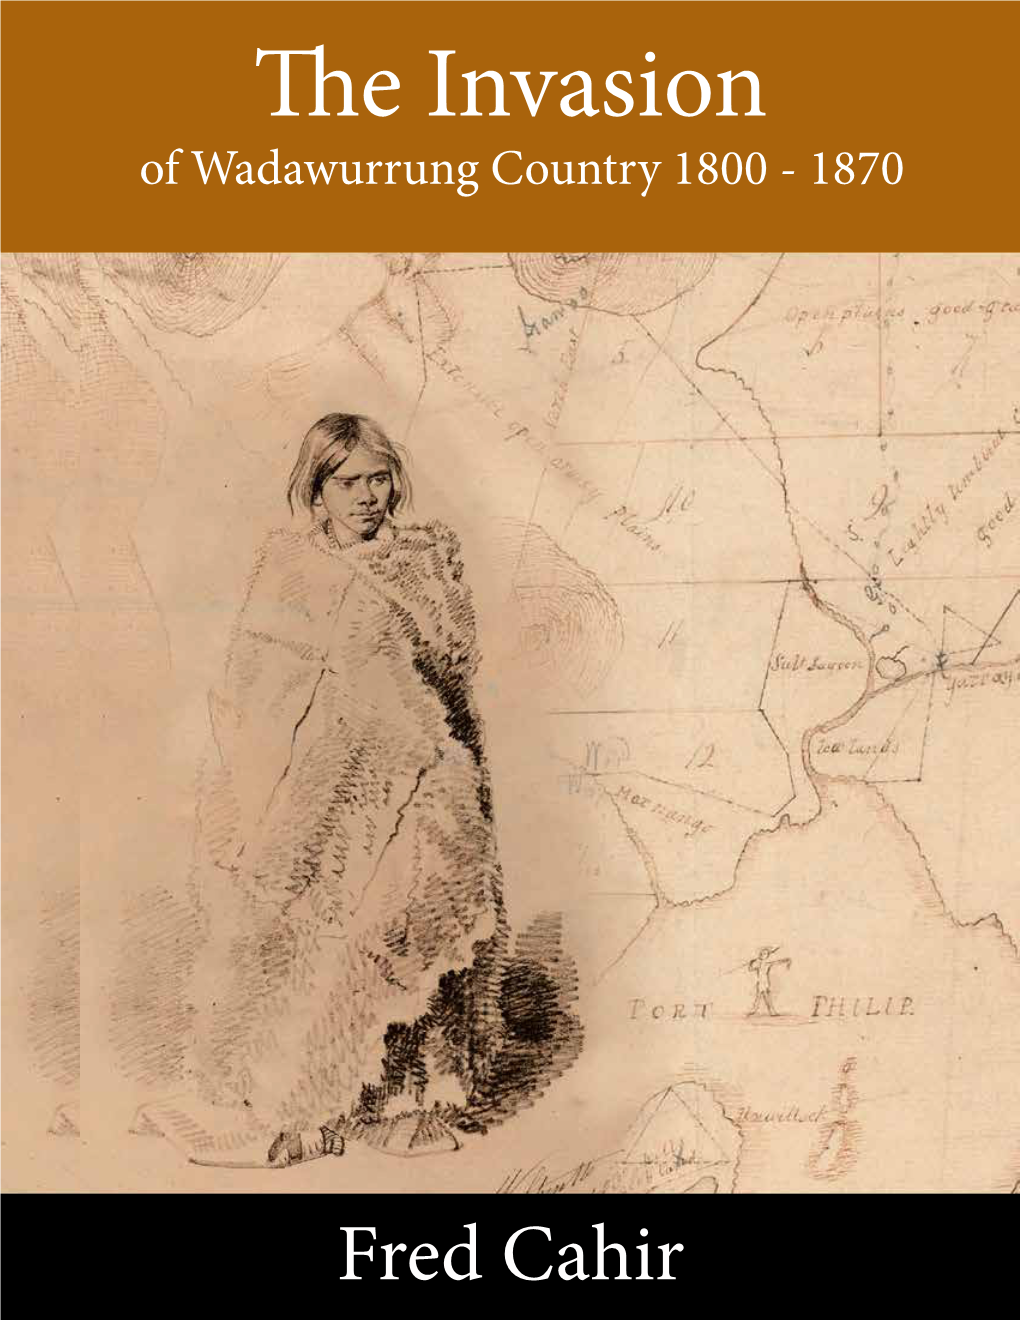 The Invasion of Wadawurrung Country 1800 - 1870